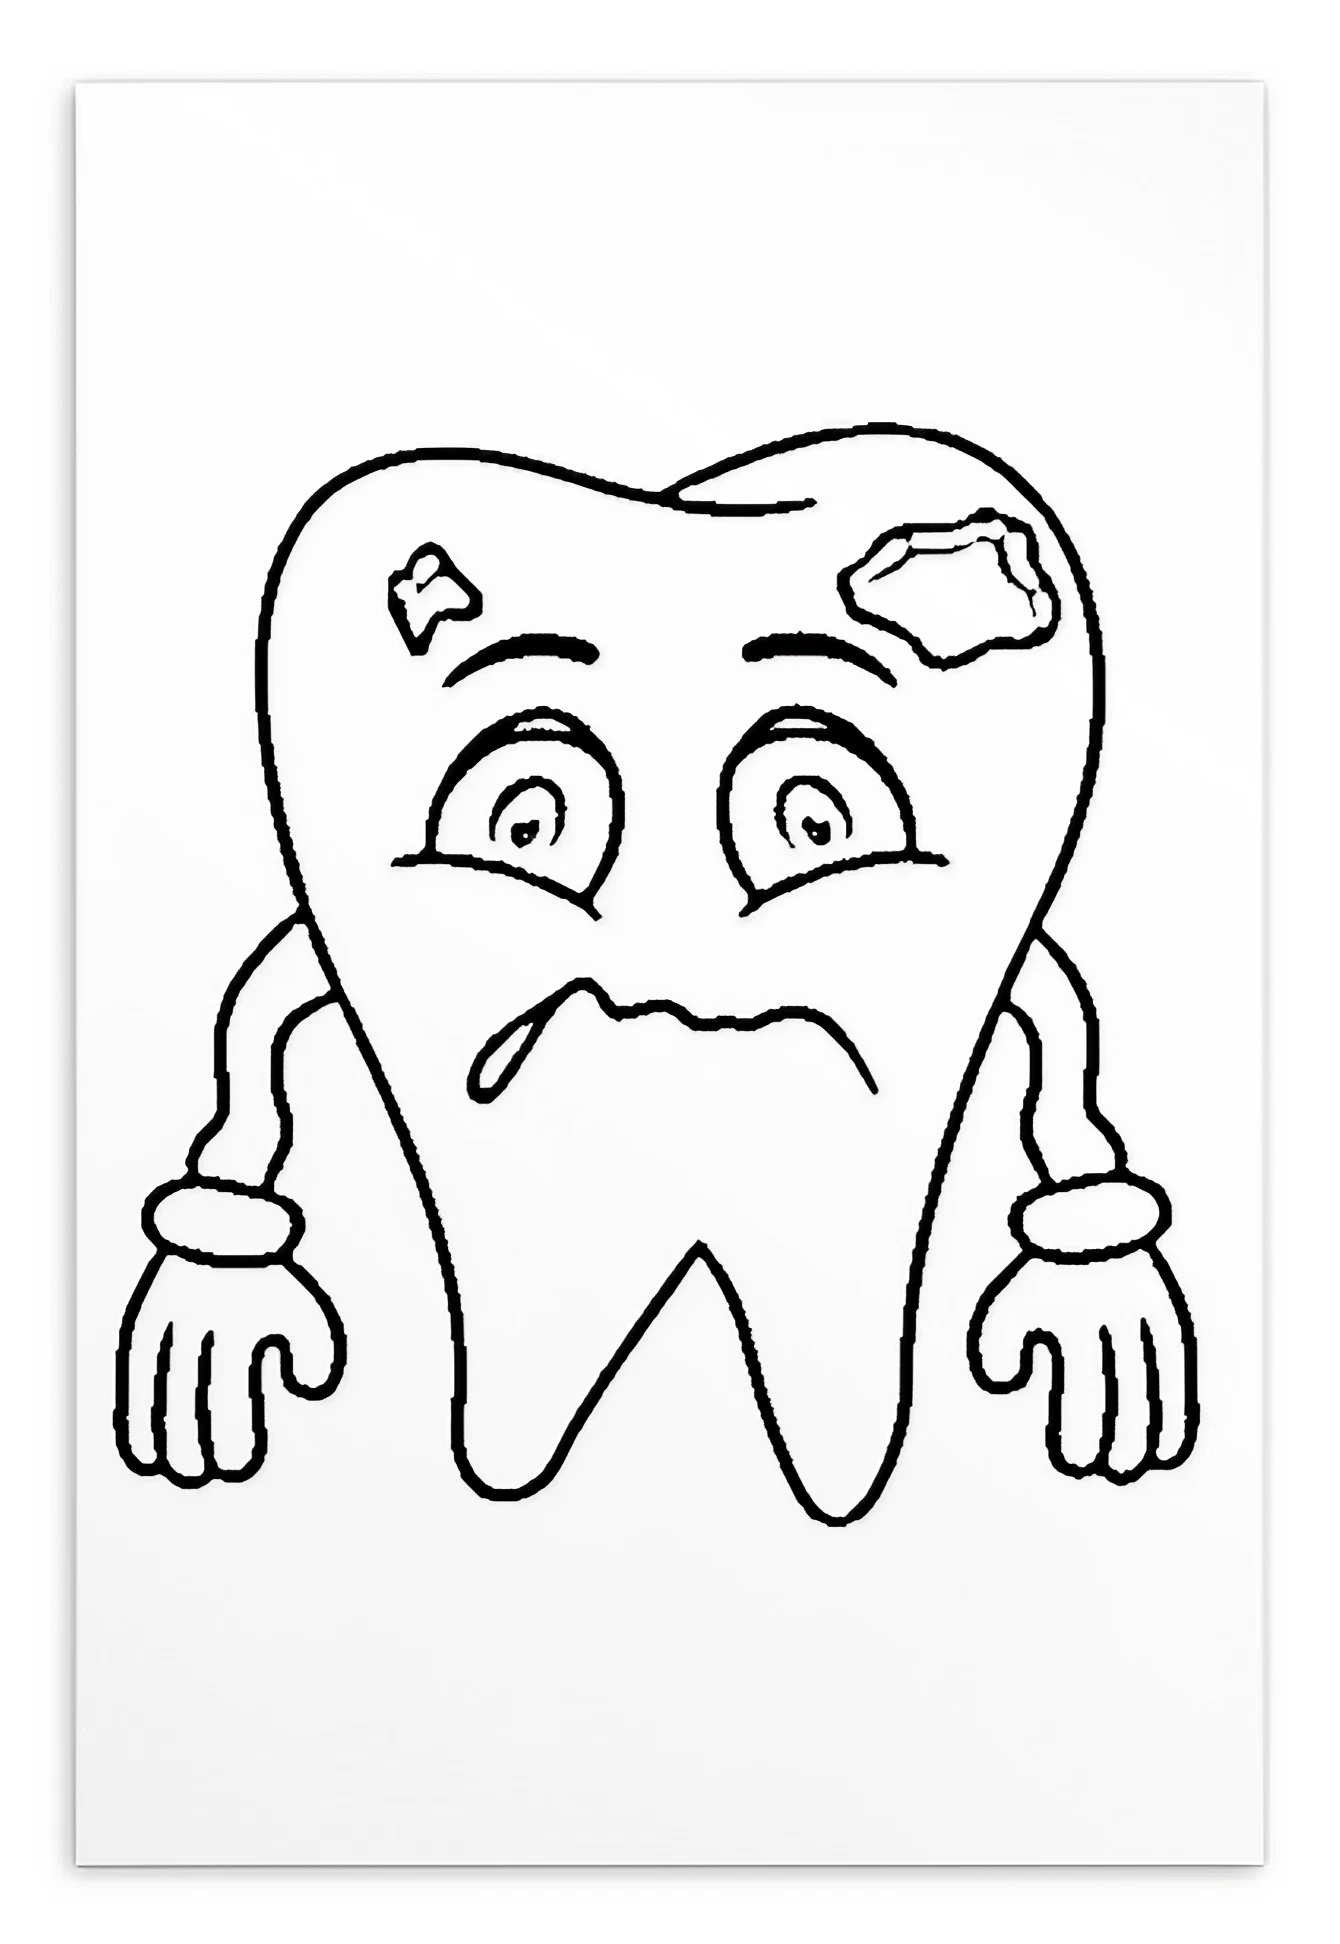 Colouring-In Cards - Tooth With Cavity